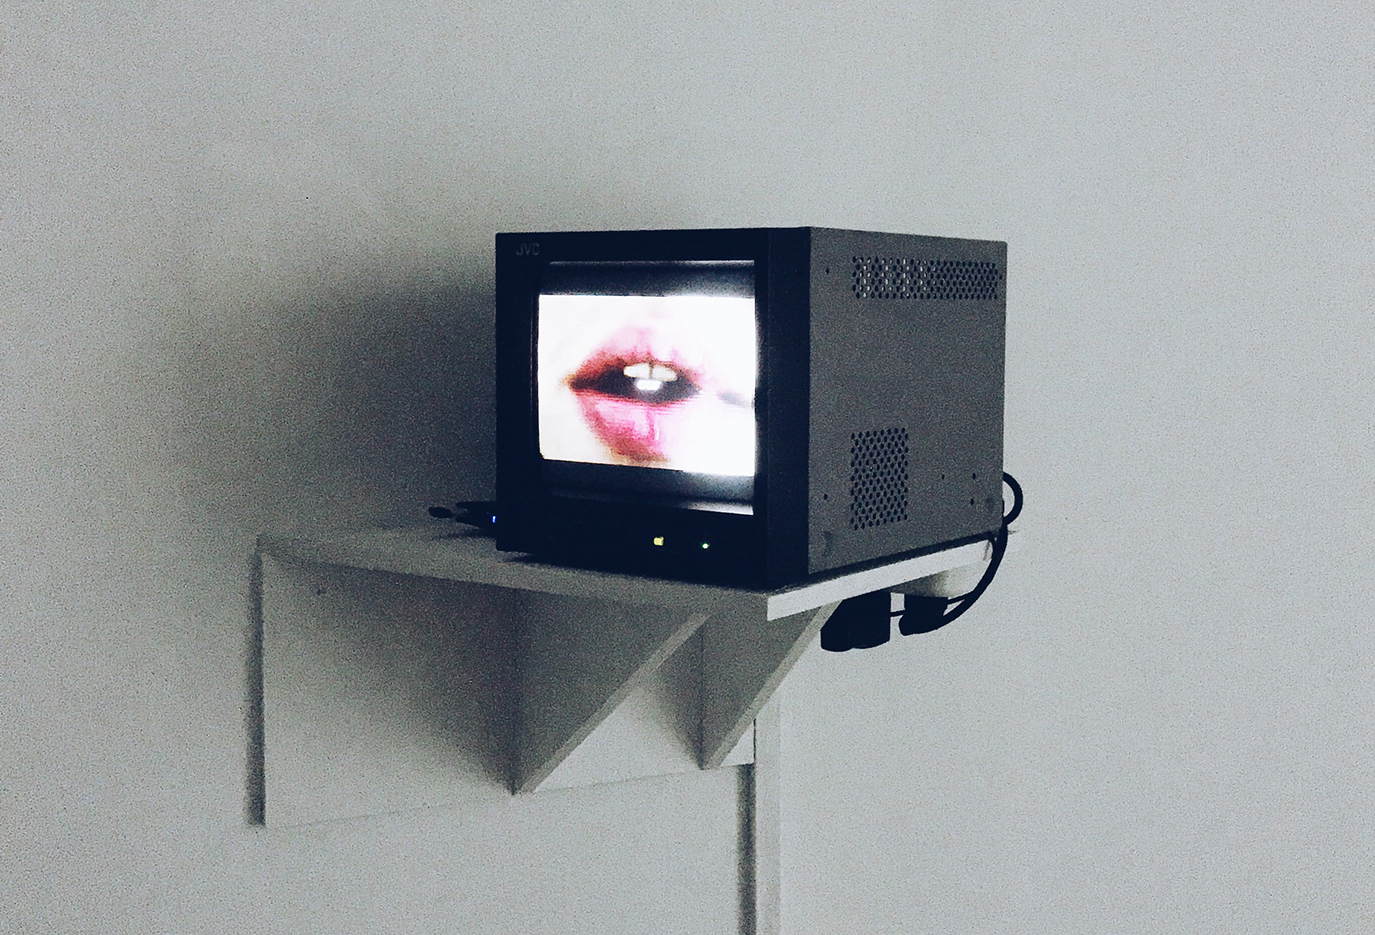 Monitor at the wall with talking mouth on screen